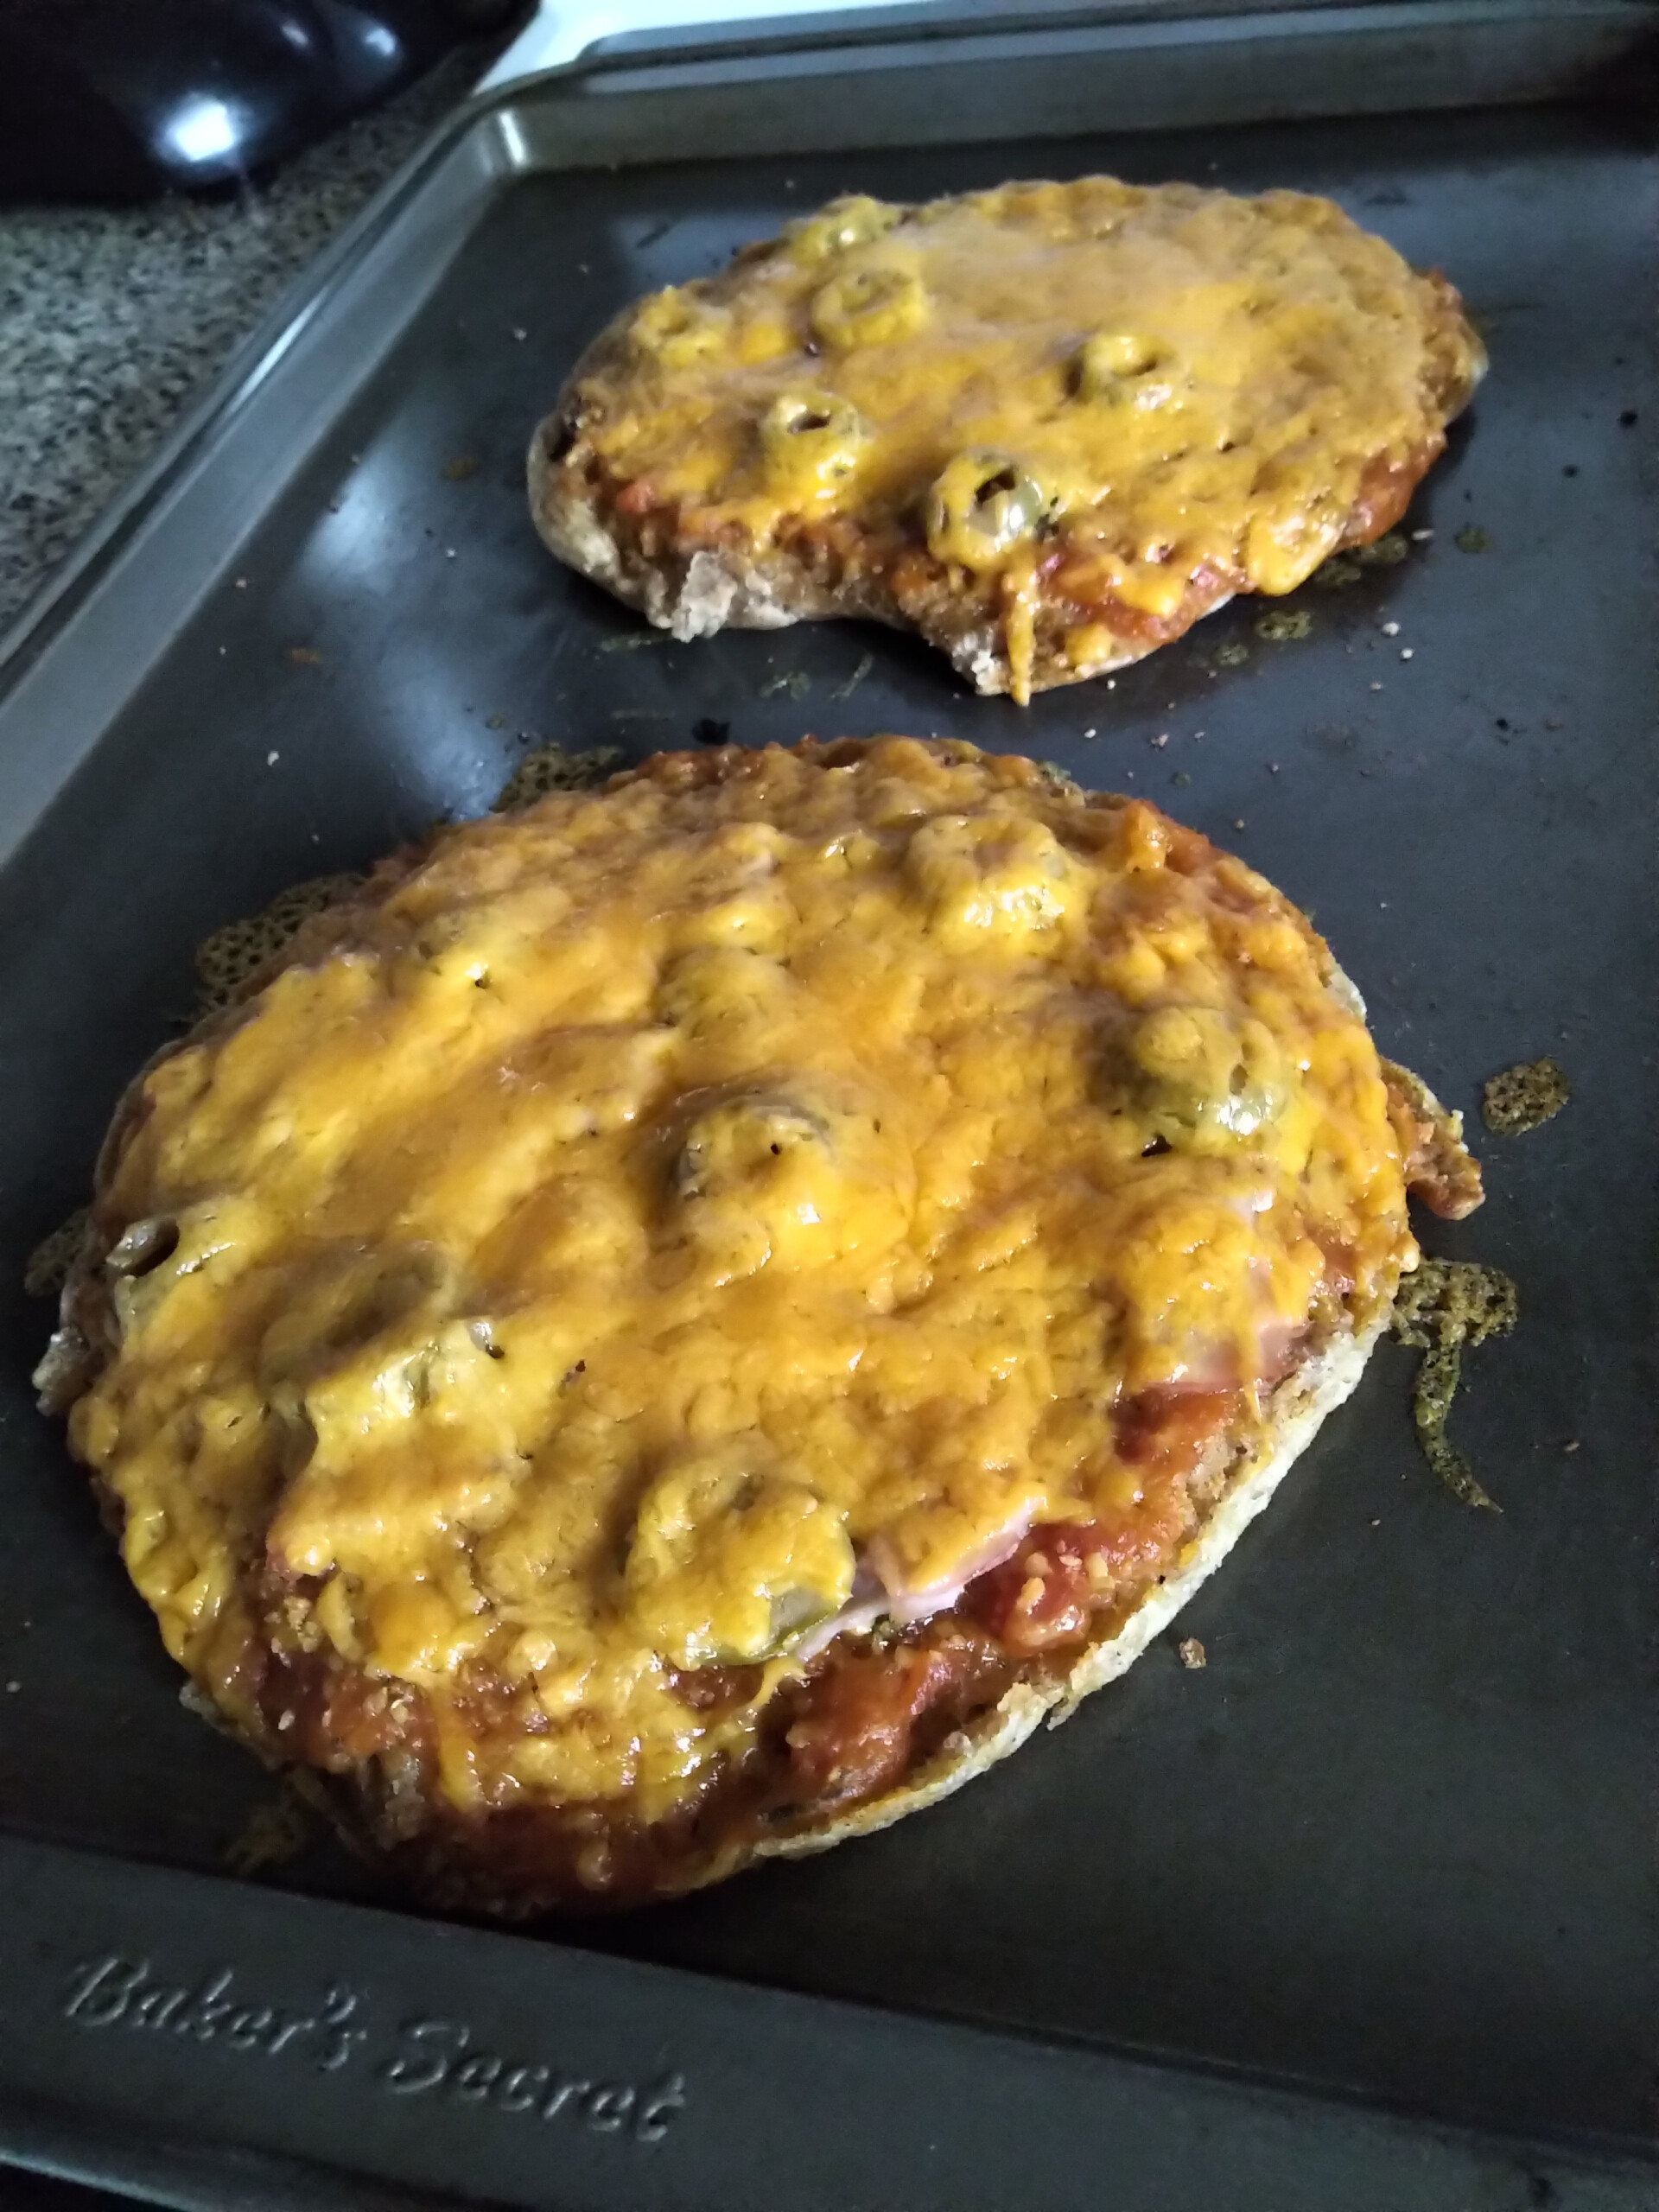 fried fermented bread pizzas